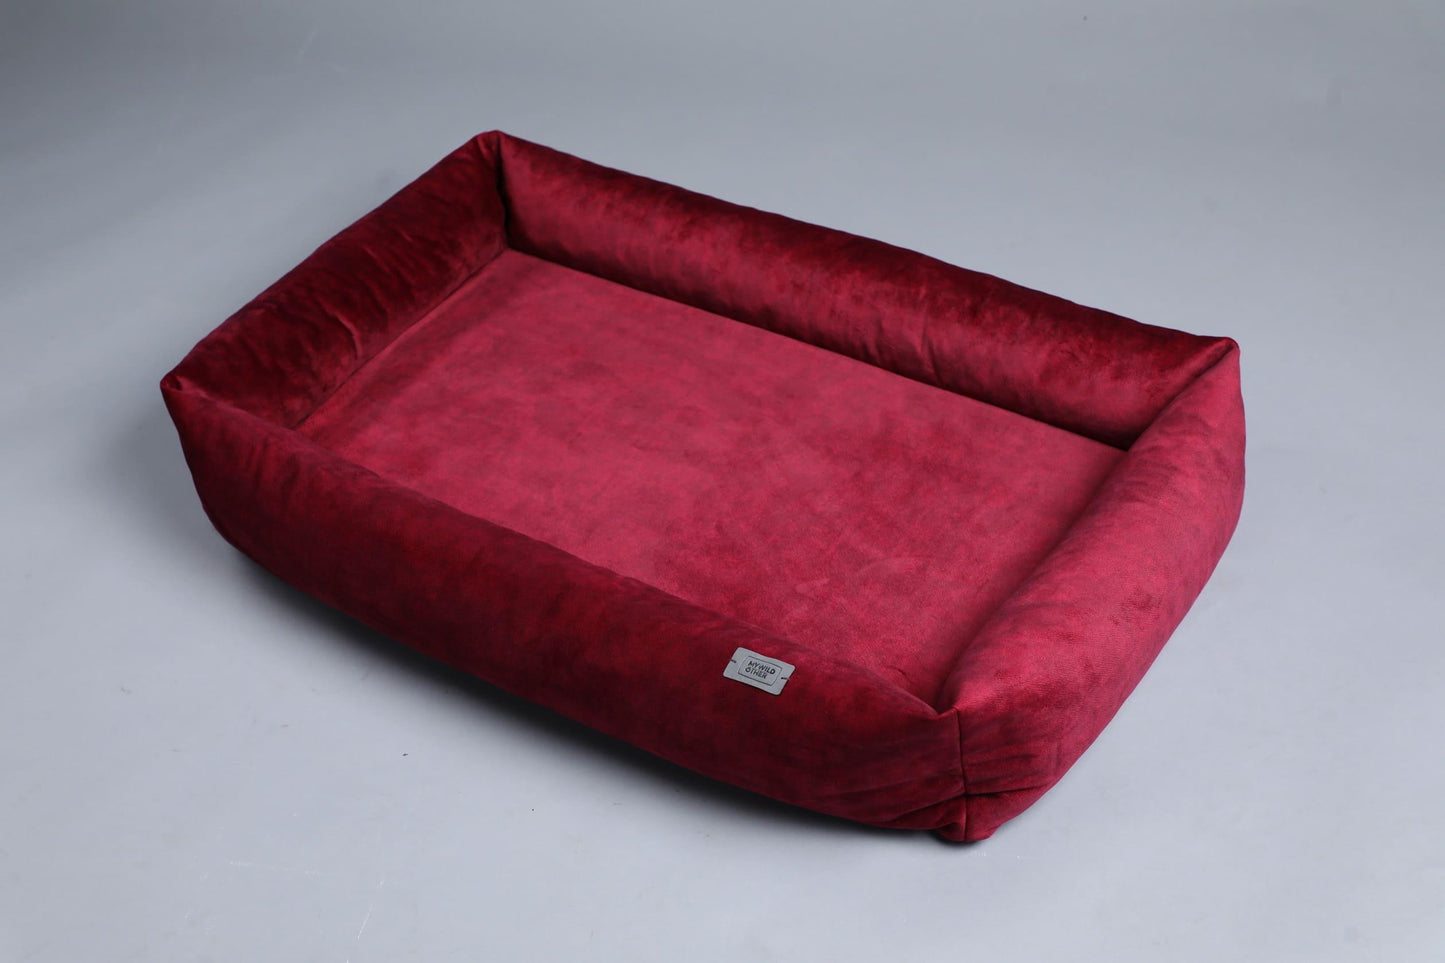 Premium dog bed with sides | 2-sided | RUBY RED - premium dog goods handmade in Europe by animalistus